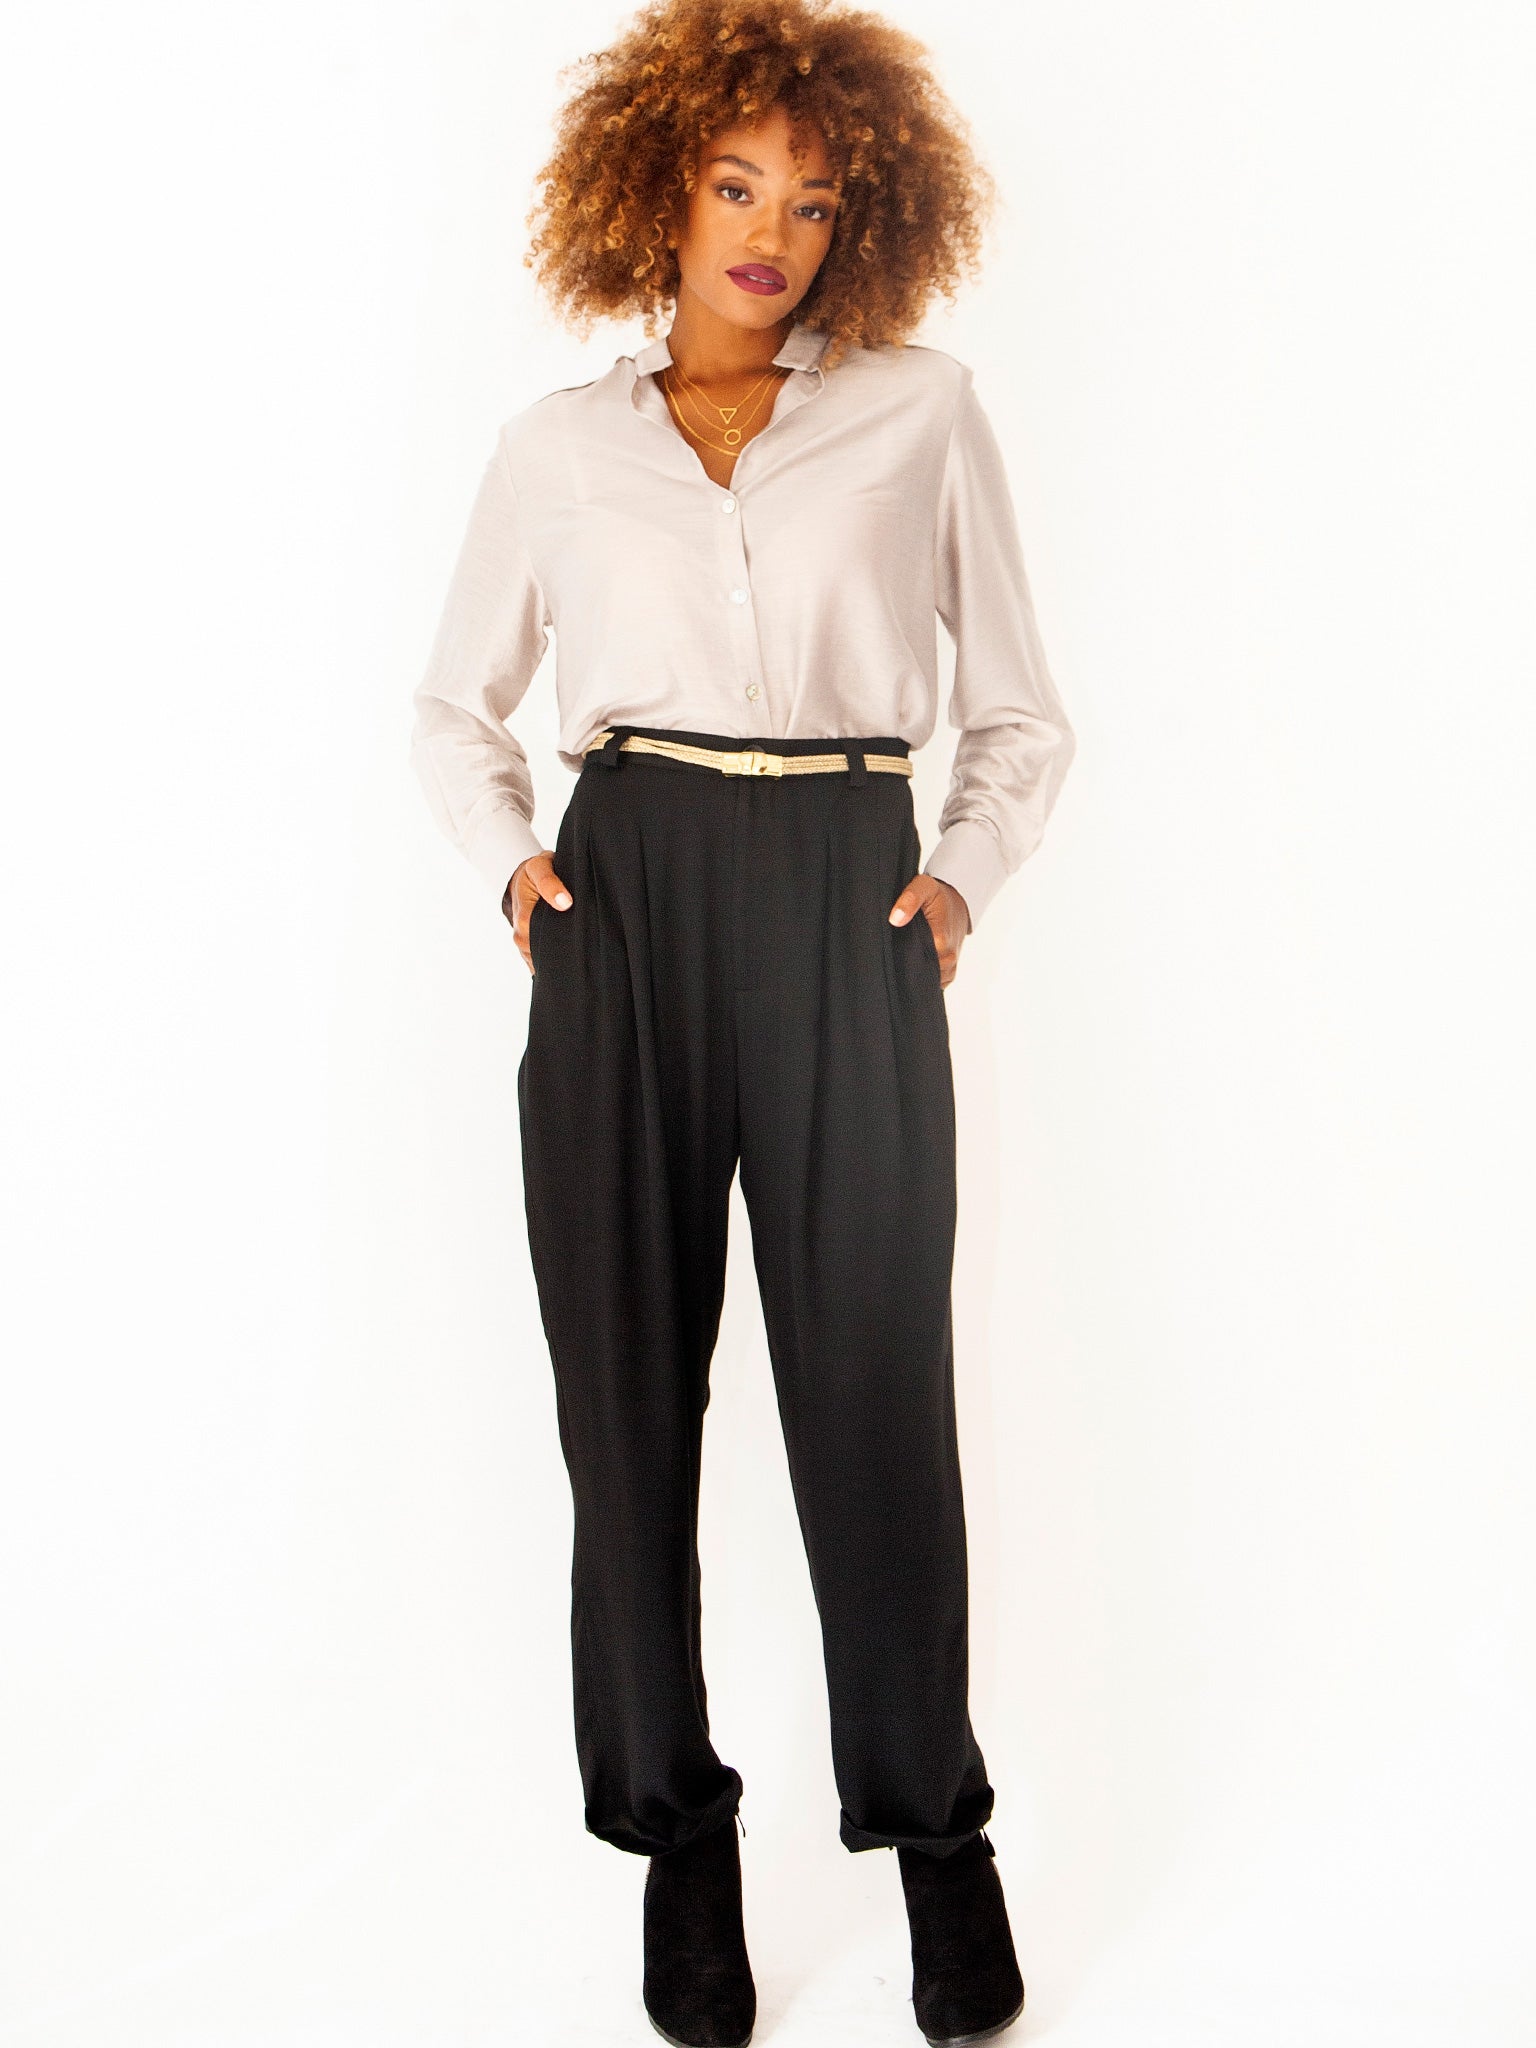 Black Office, Dinner And Cocktail Pants For Women, Samantha Sotos